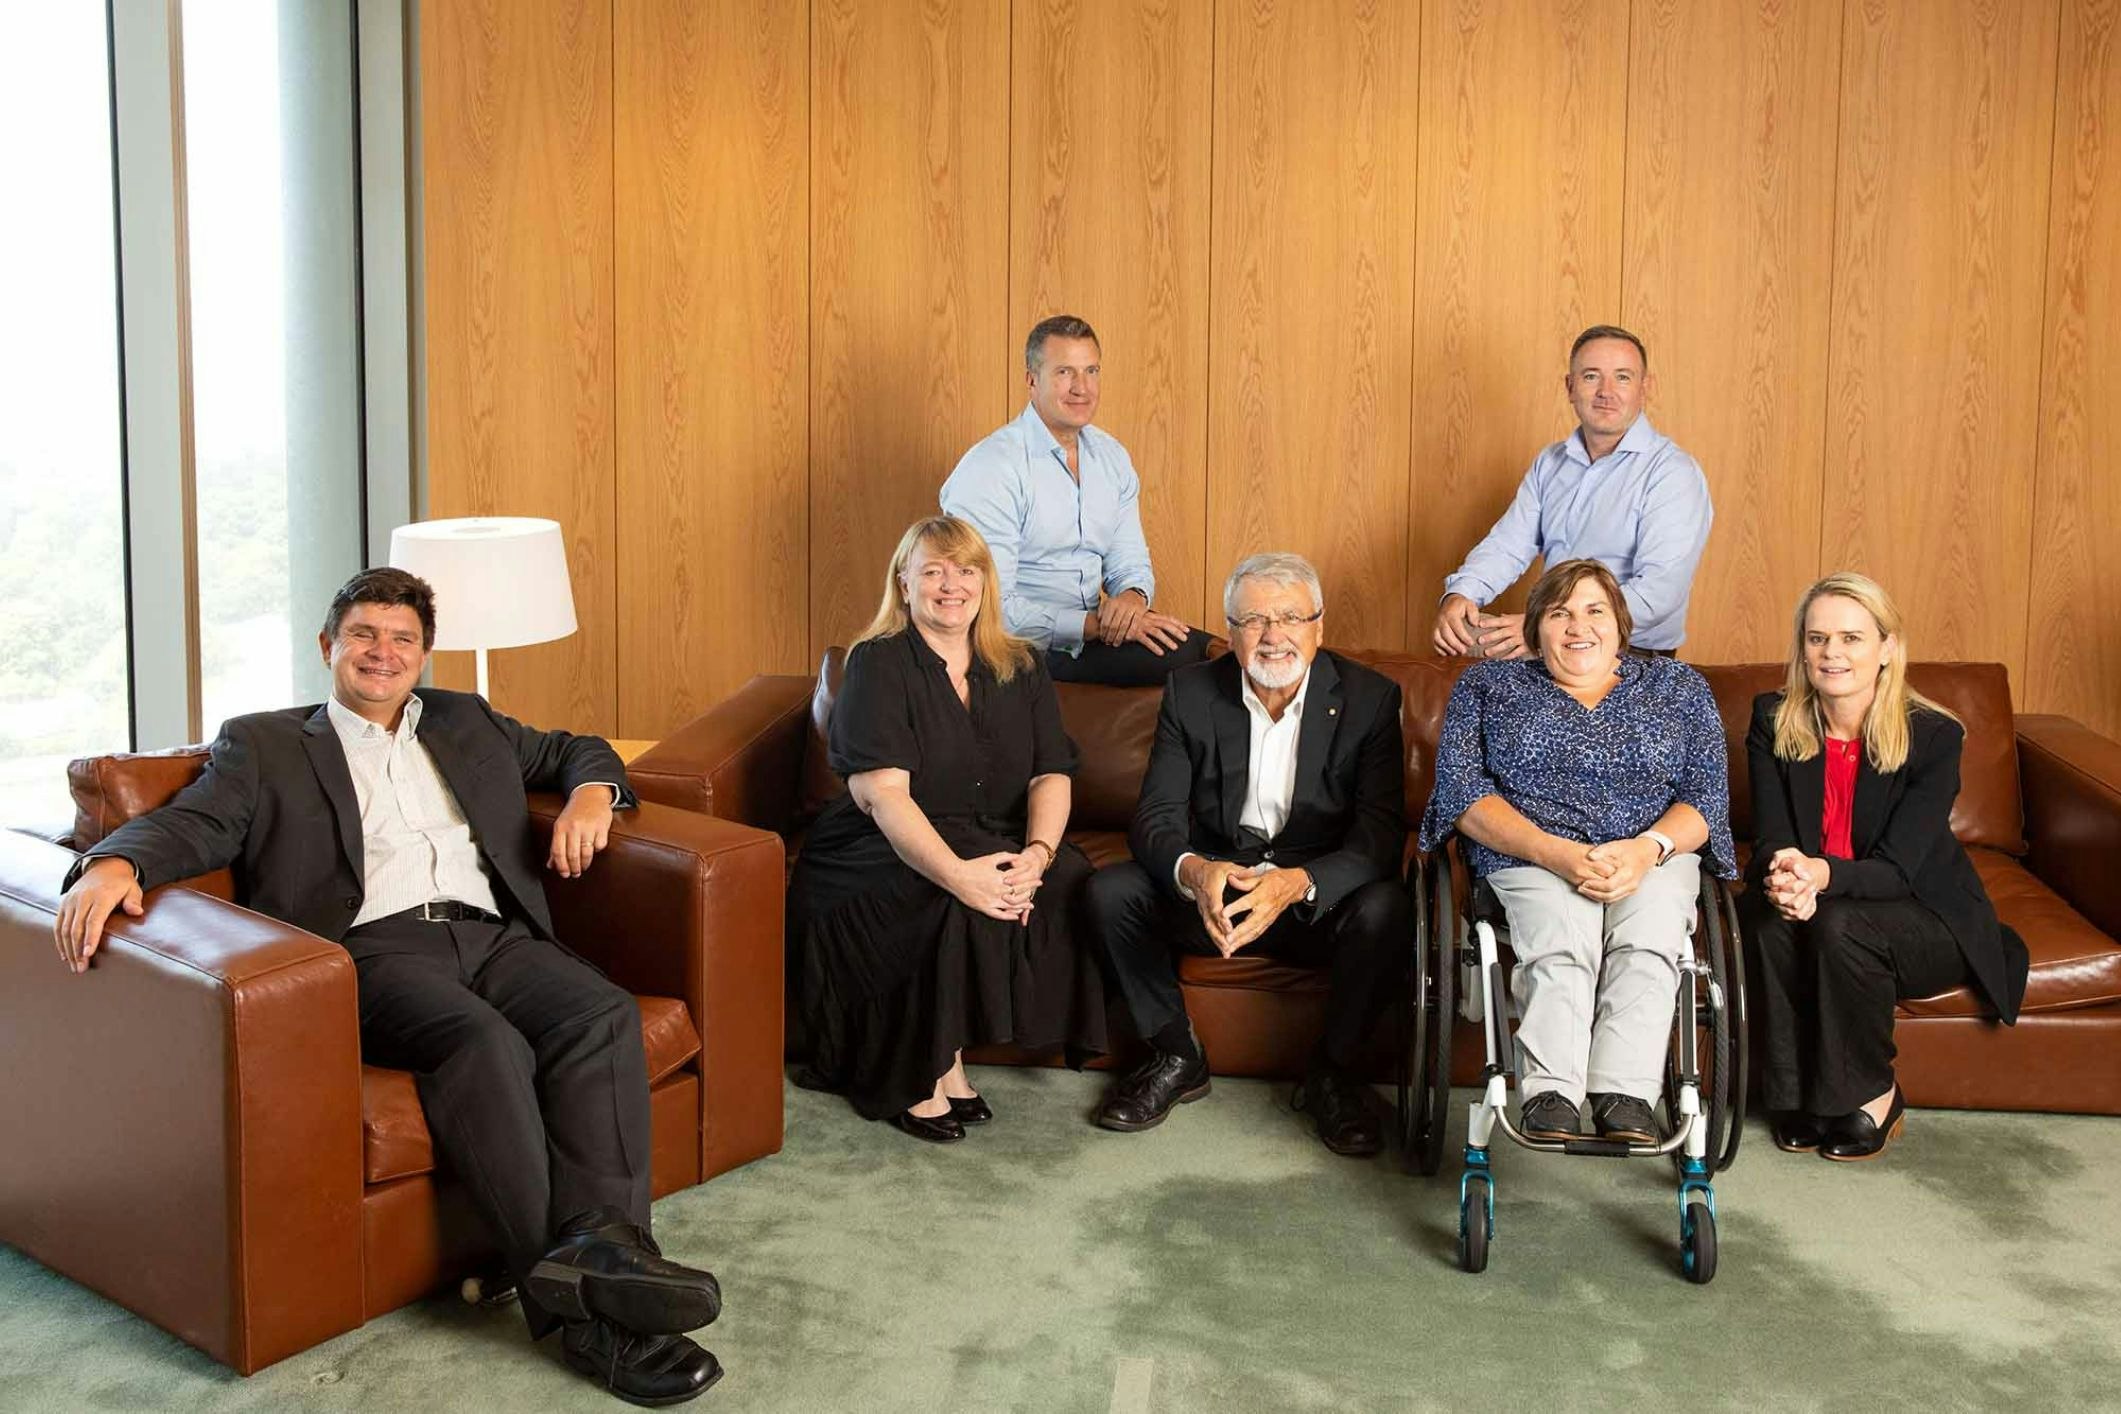 <p>The uLaunch board is made up of people who know what it’s like to find work with disability. [Source: uLaunch]</p>
